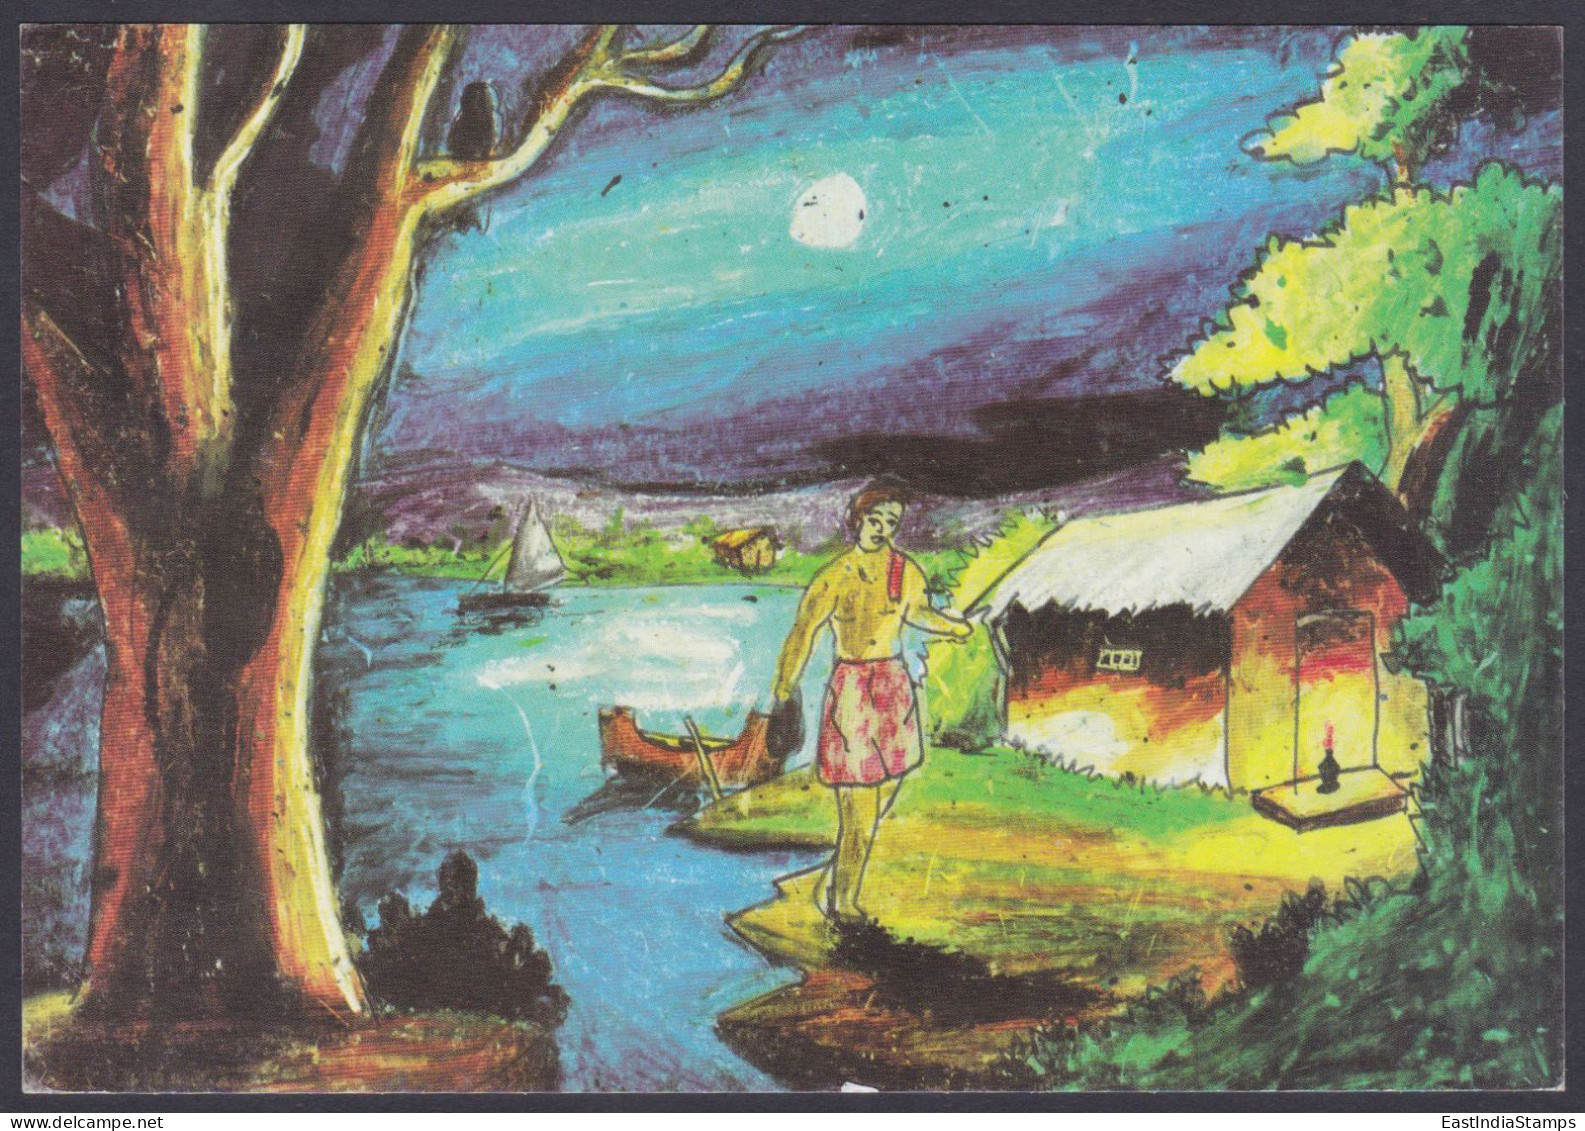 Inde India 2007 Mint Postcard Children's Day, Child, Drawing, Painting, Moon, Hut, Man, River, Boat, Trees - Inde